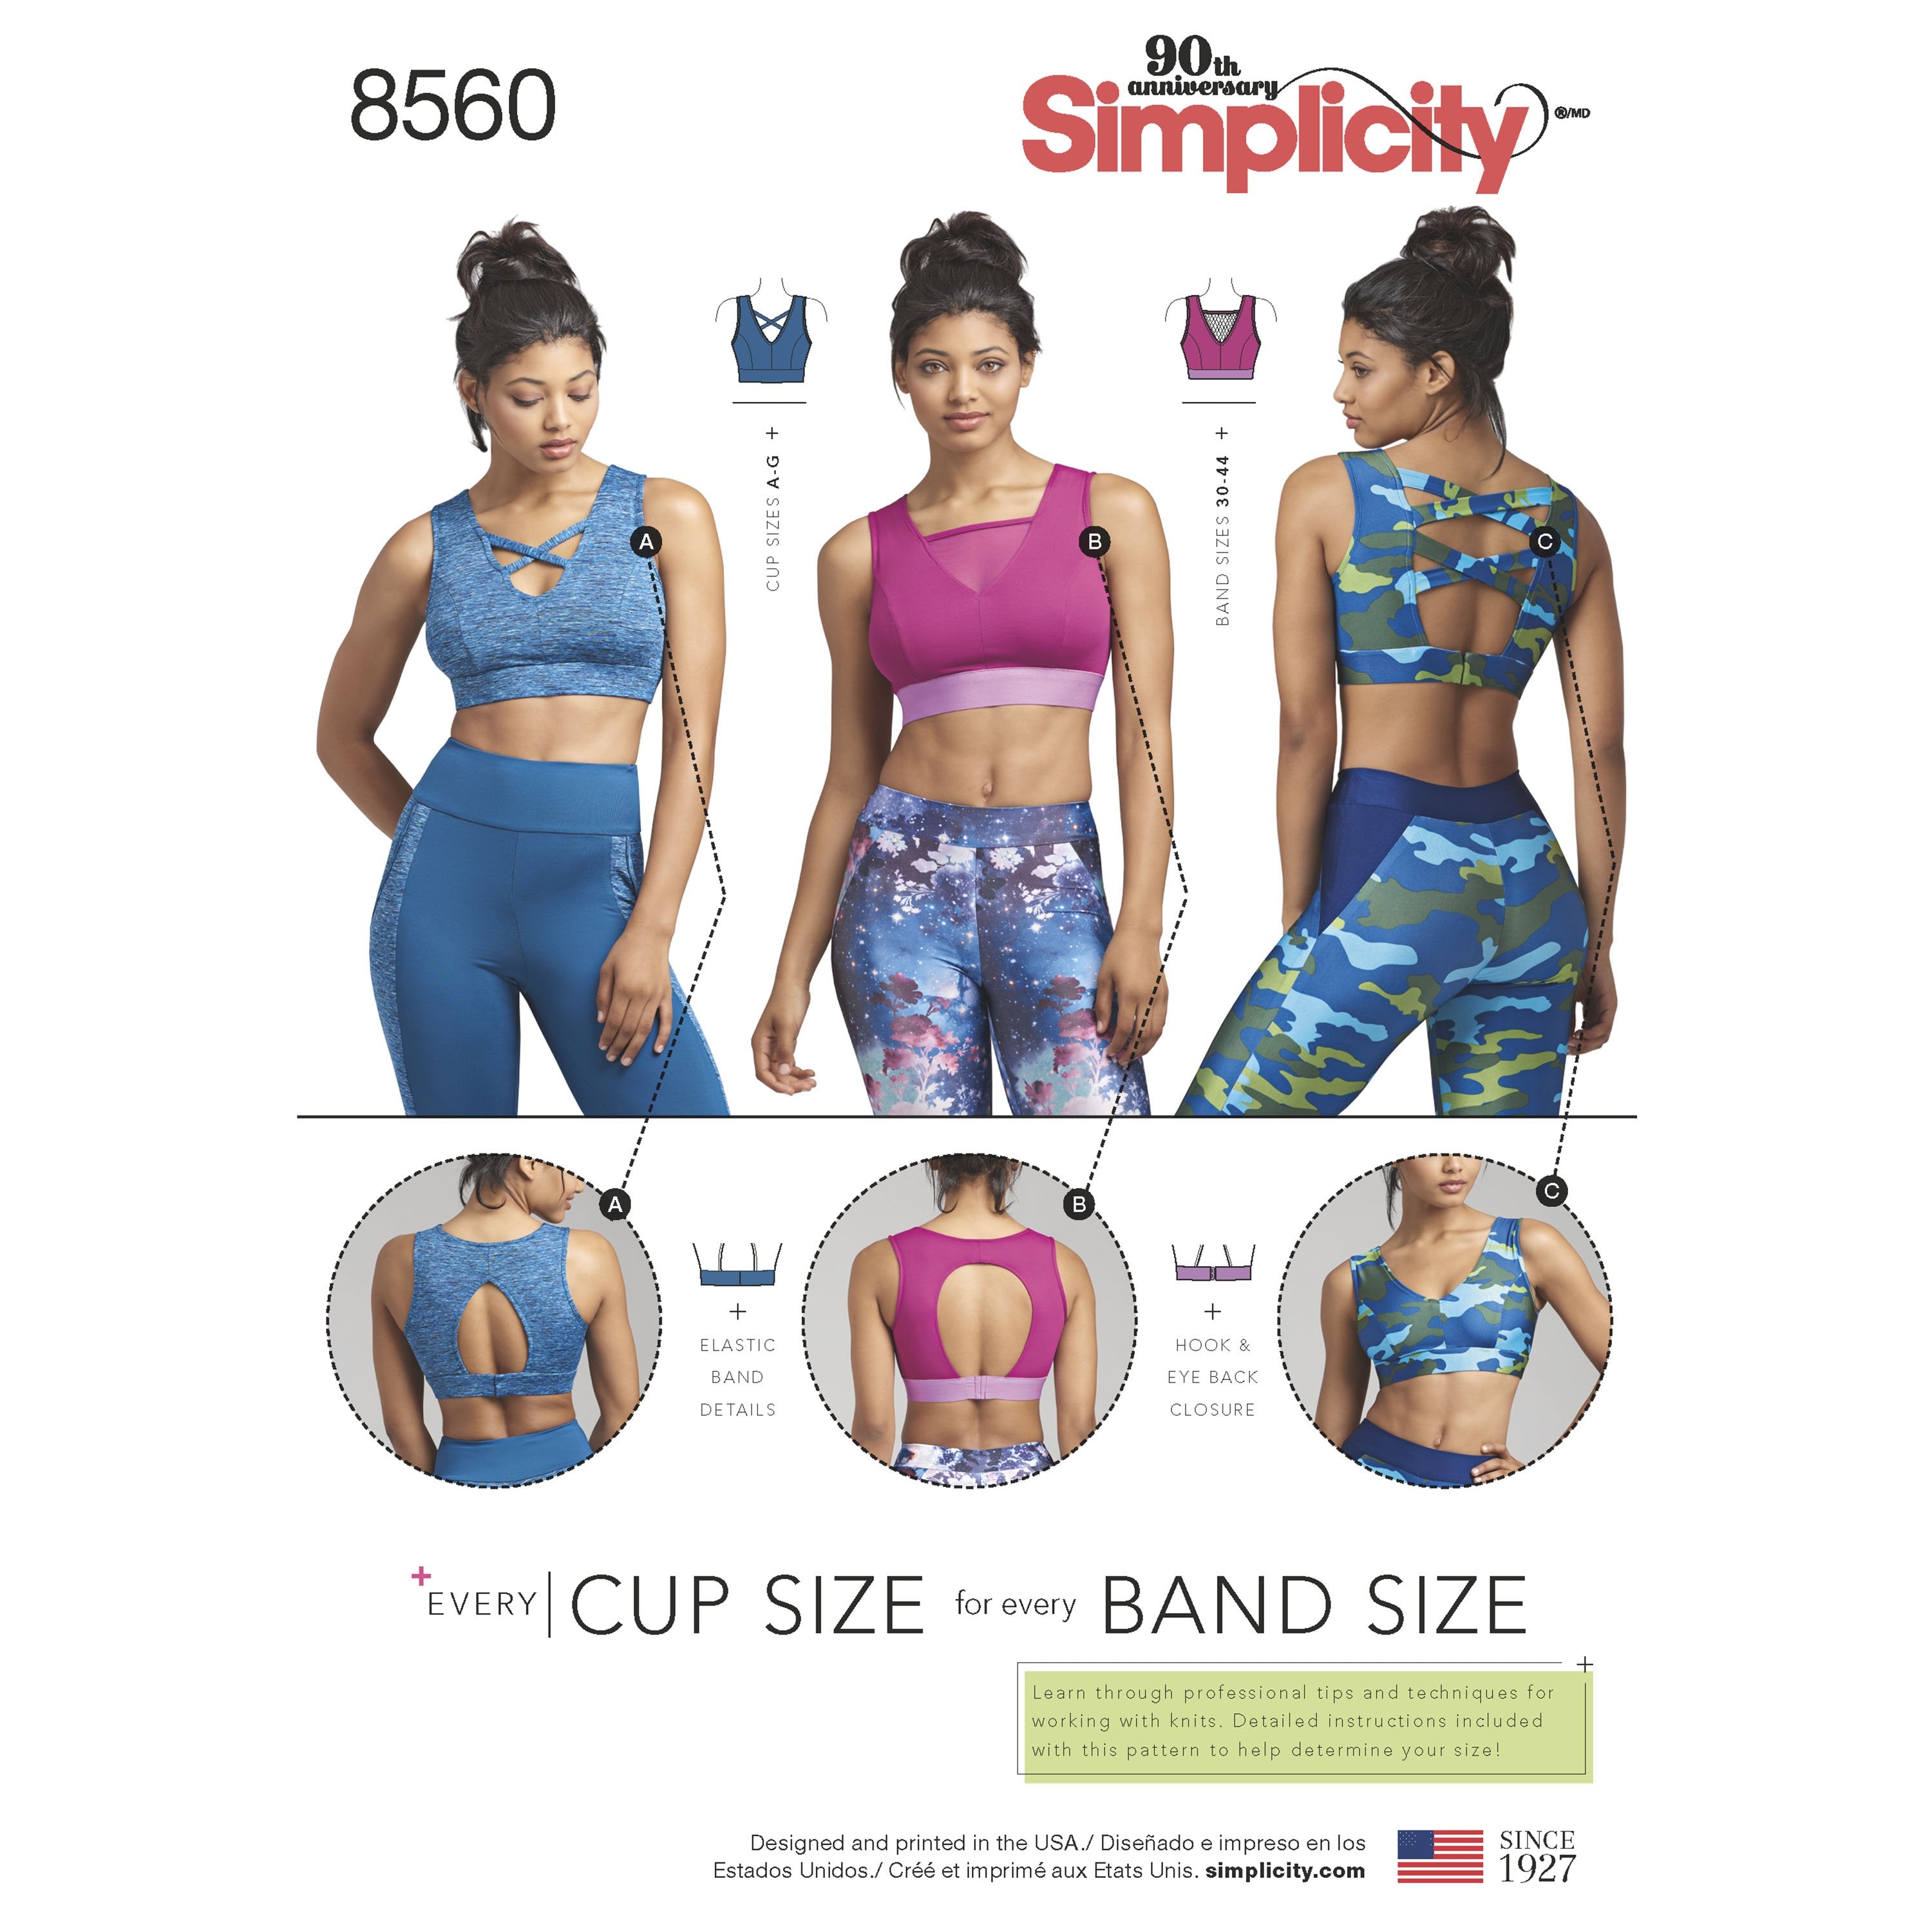 Simplicity Pattern 8560 womens knit sports bras from Jaycotts Sewing Supplies